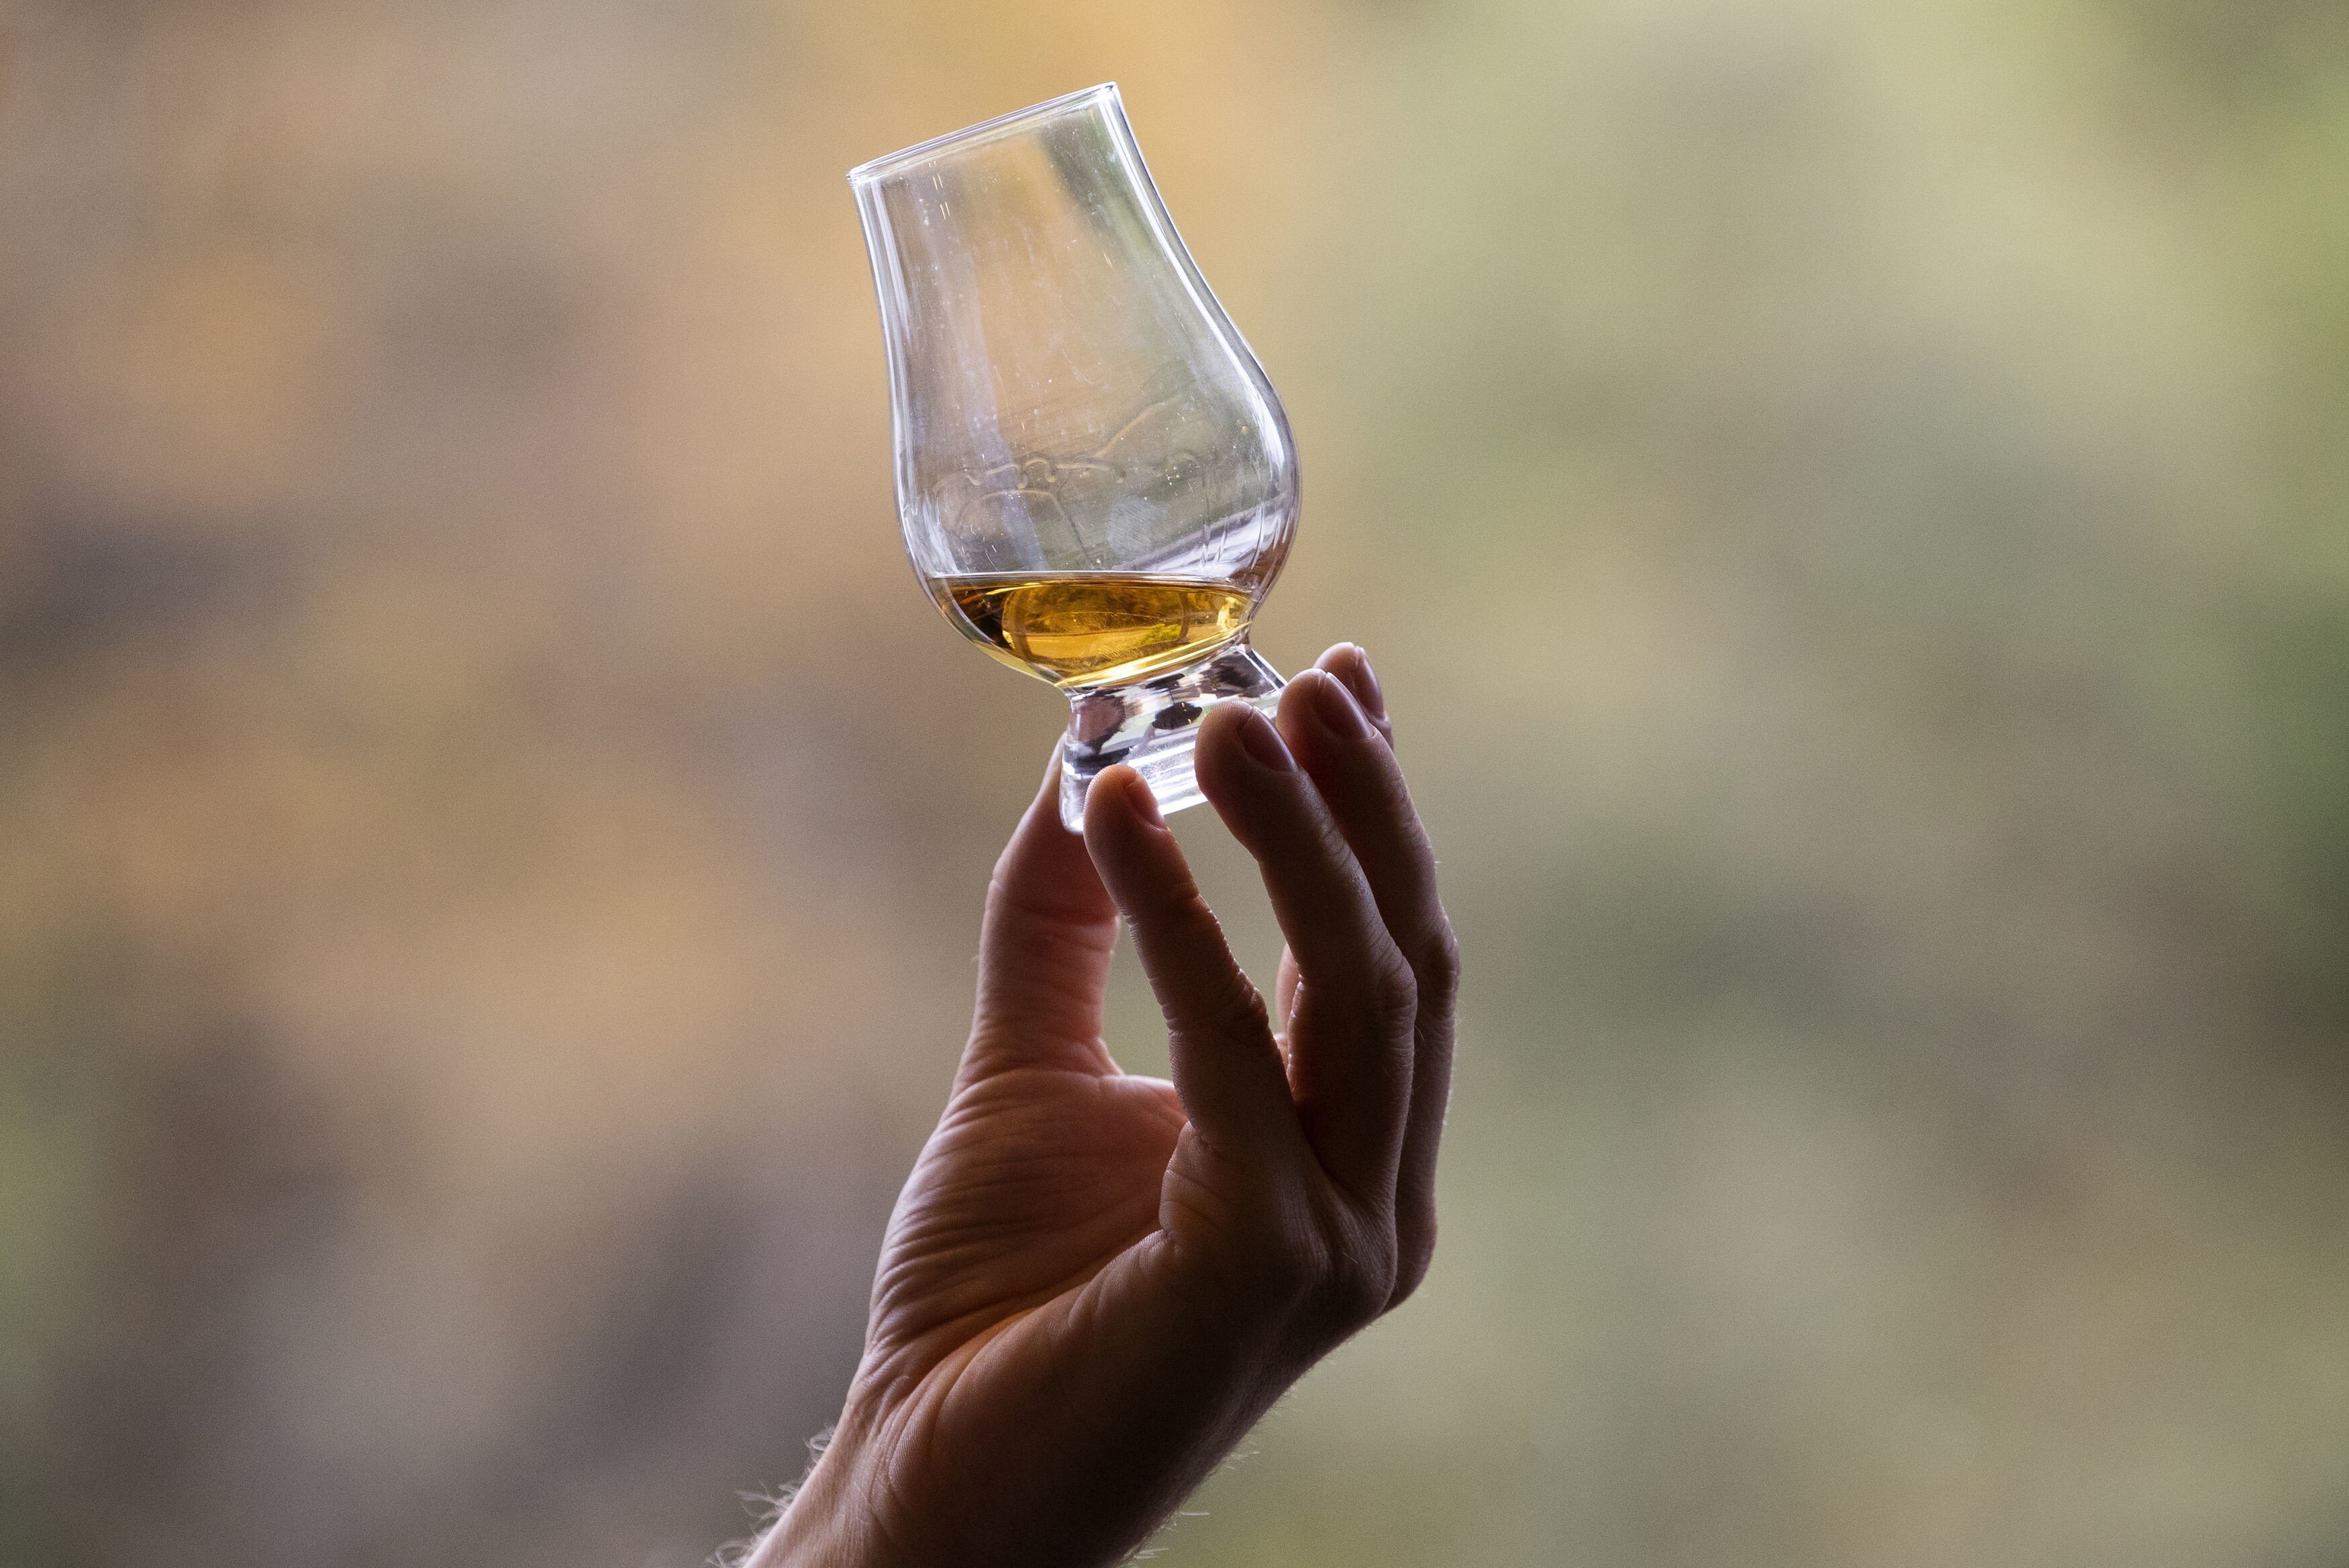 Highland whiskies can be extremely are varied in style. Highland malts but they all share a nutty, slightly peaty, full-bodied flavour profile. Photo: Getty Images